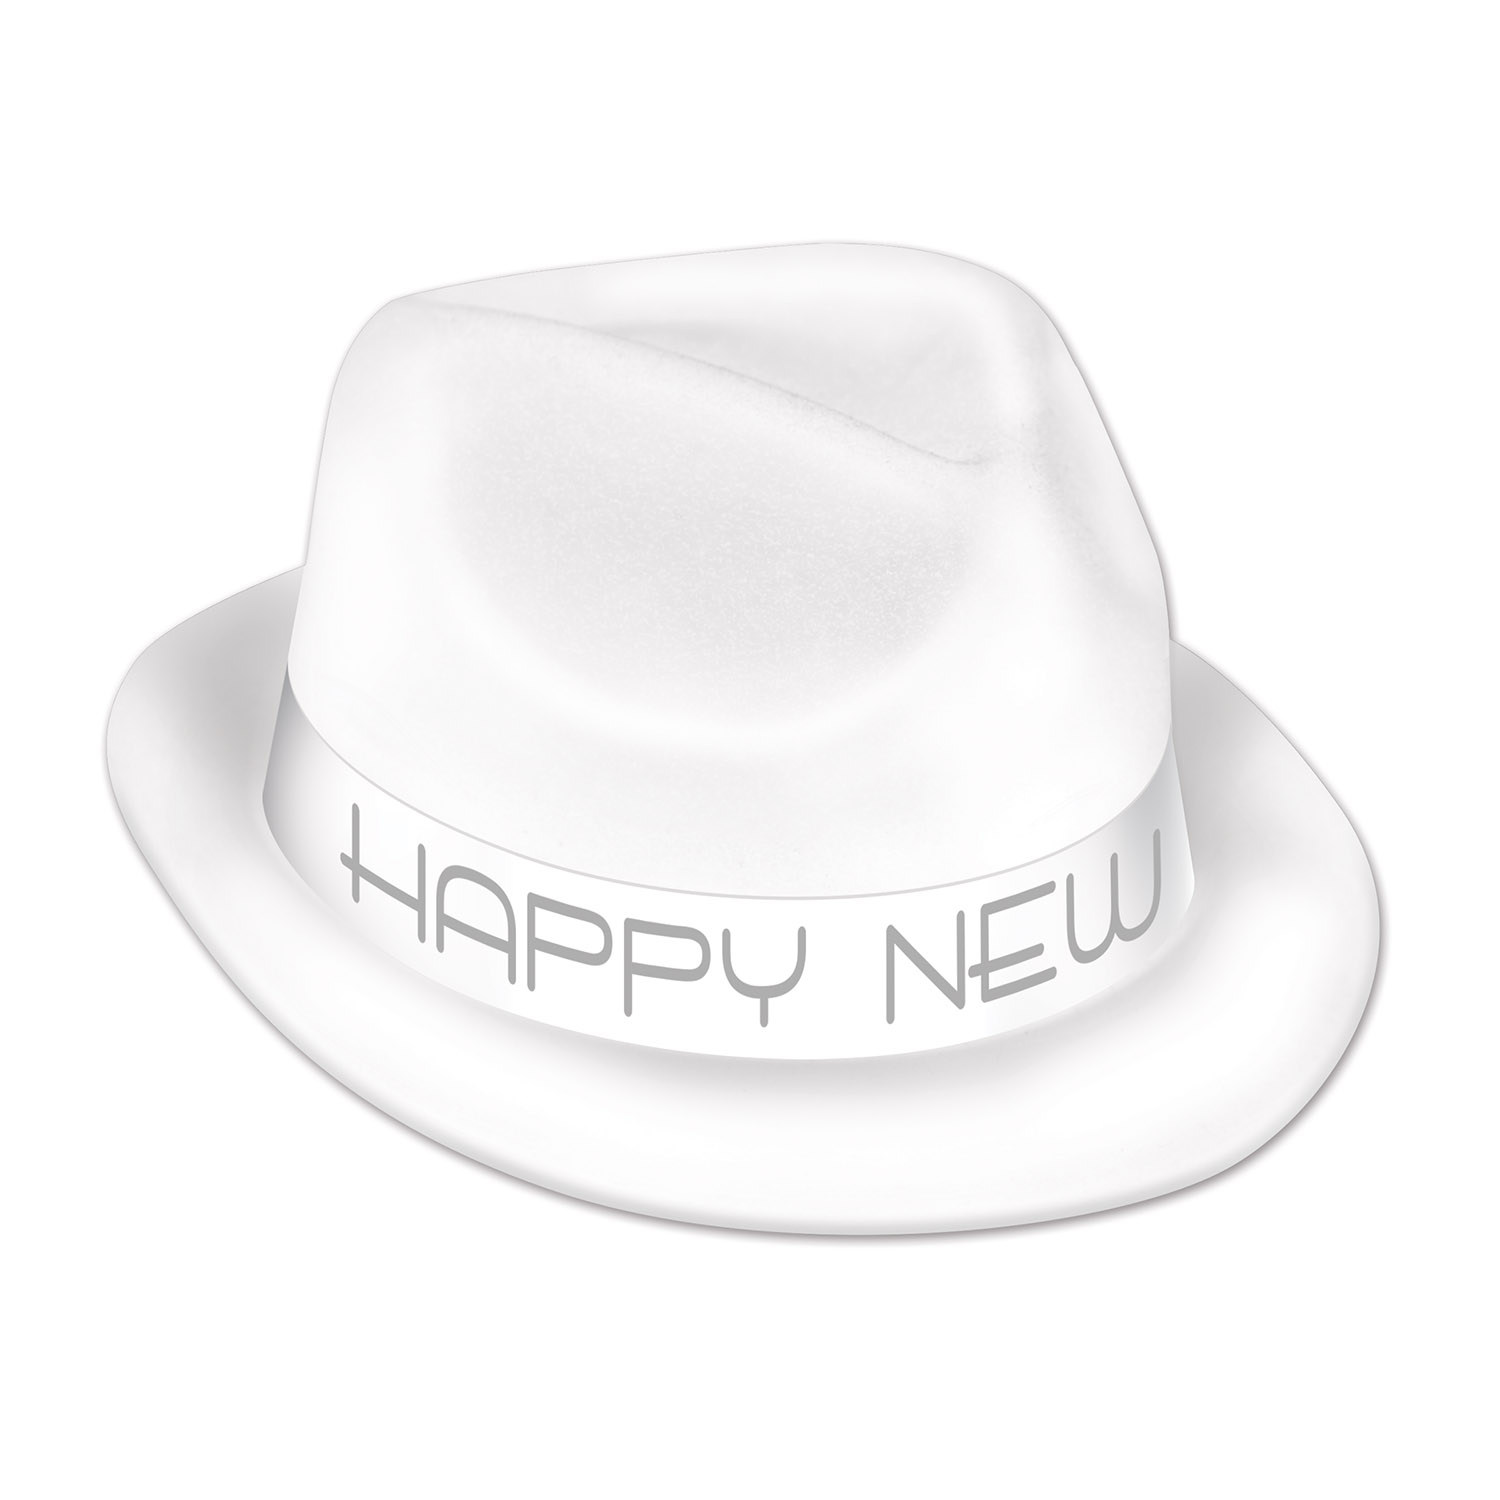 White plastic material coated in velour material with a white band that reads "Happy New Year" in silver.